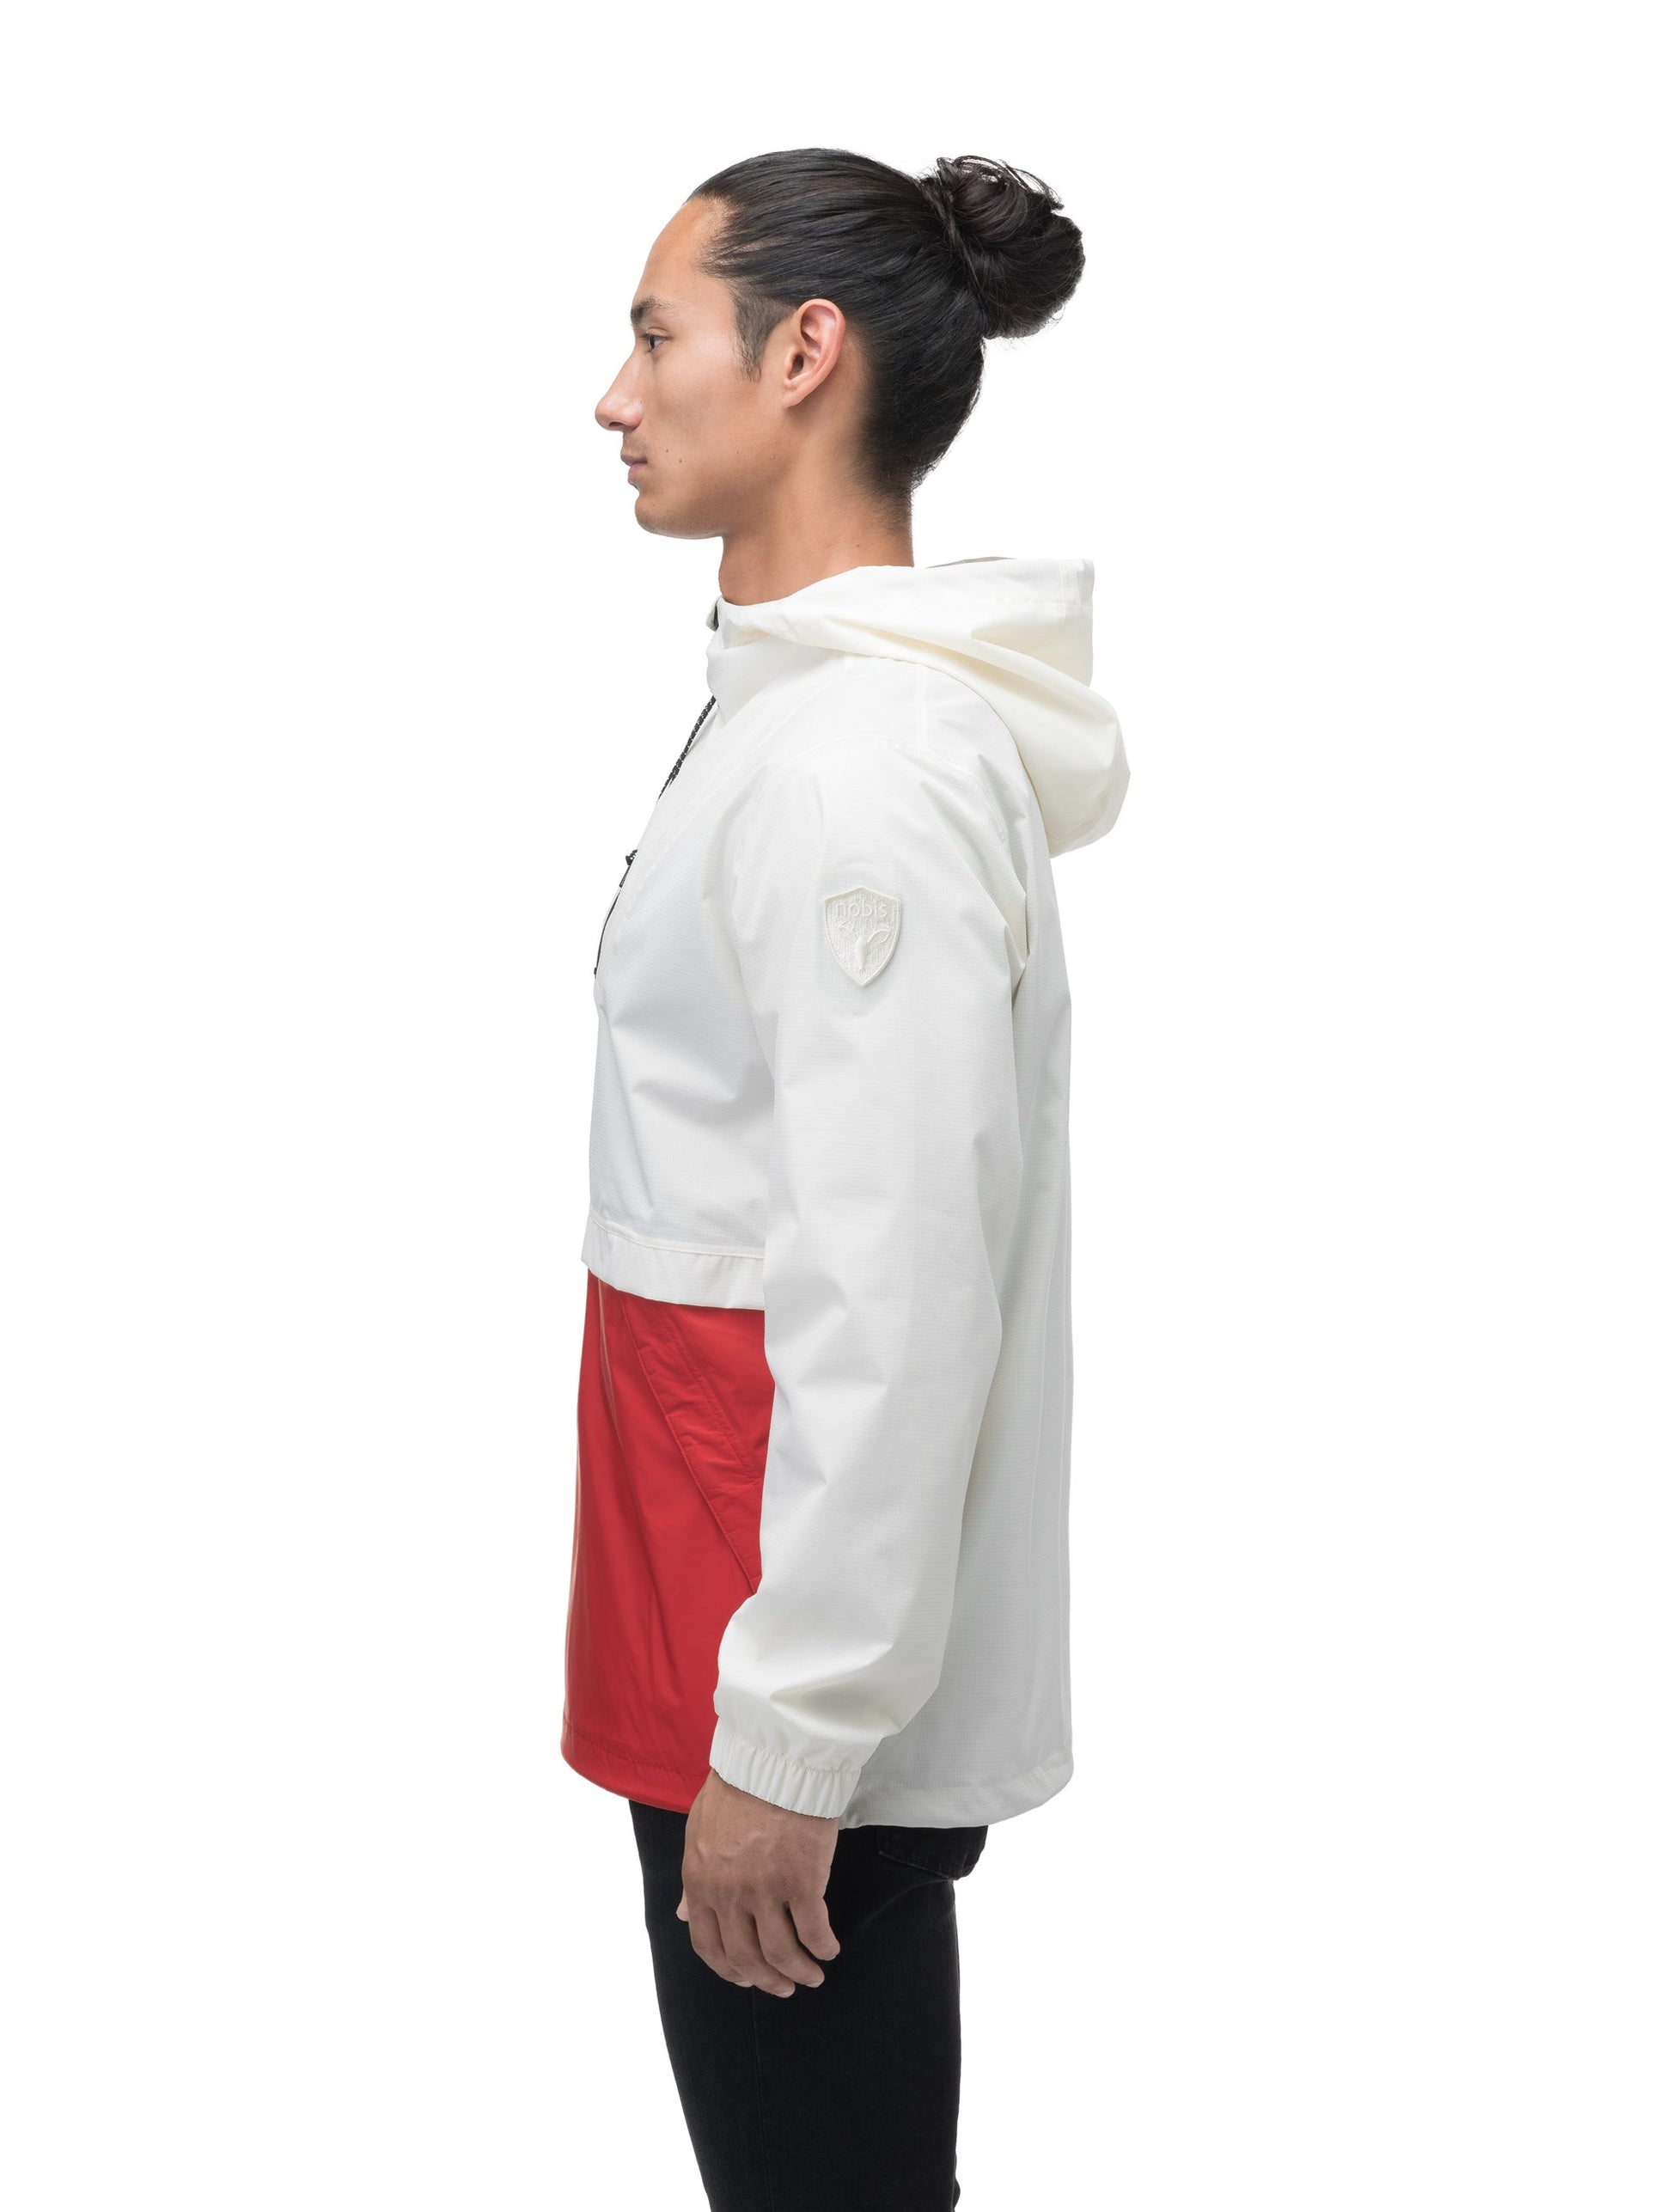 Men's hip length hooded pullover anorak with zipper at collar in Chalk/Vermillion